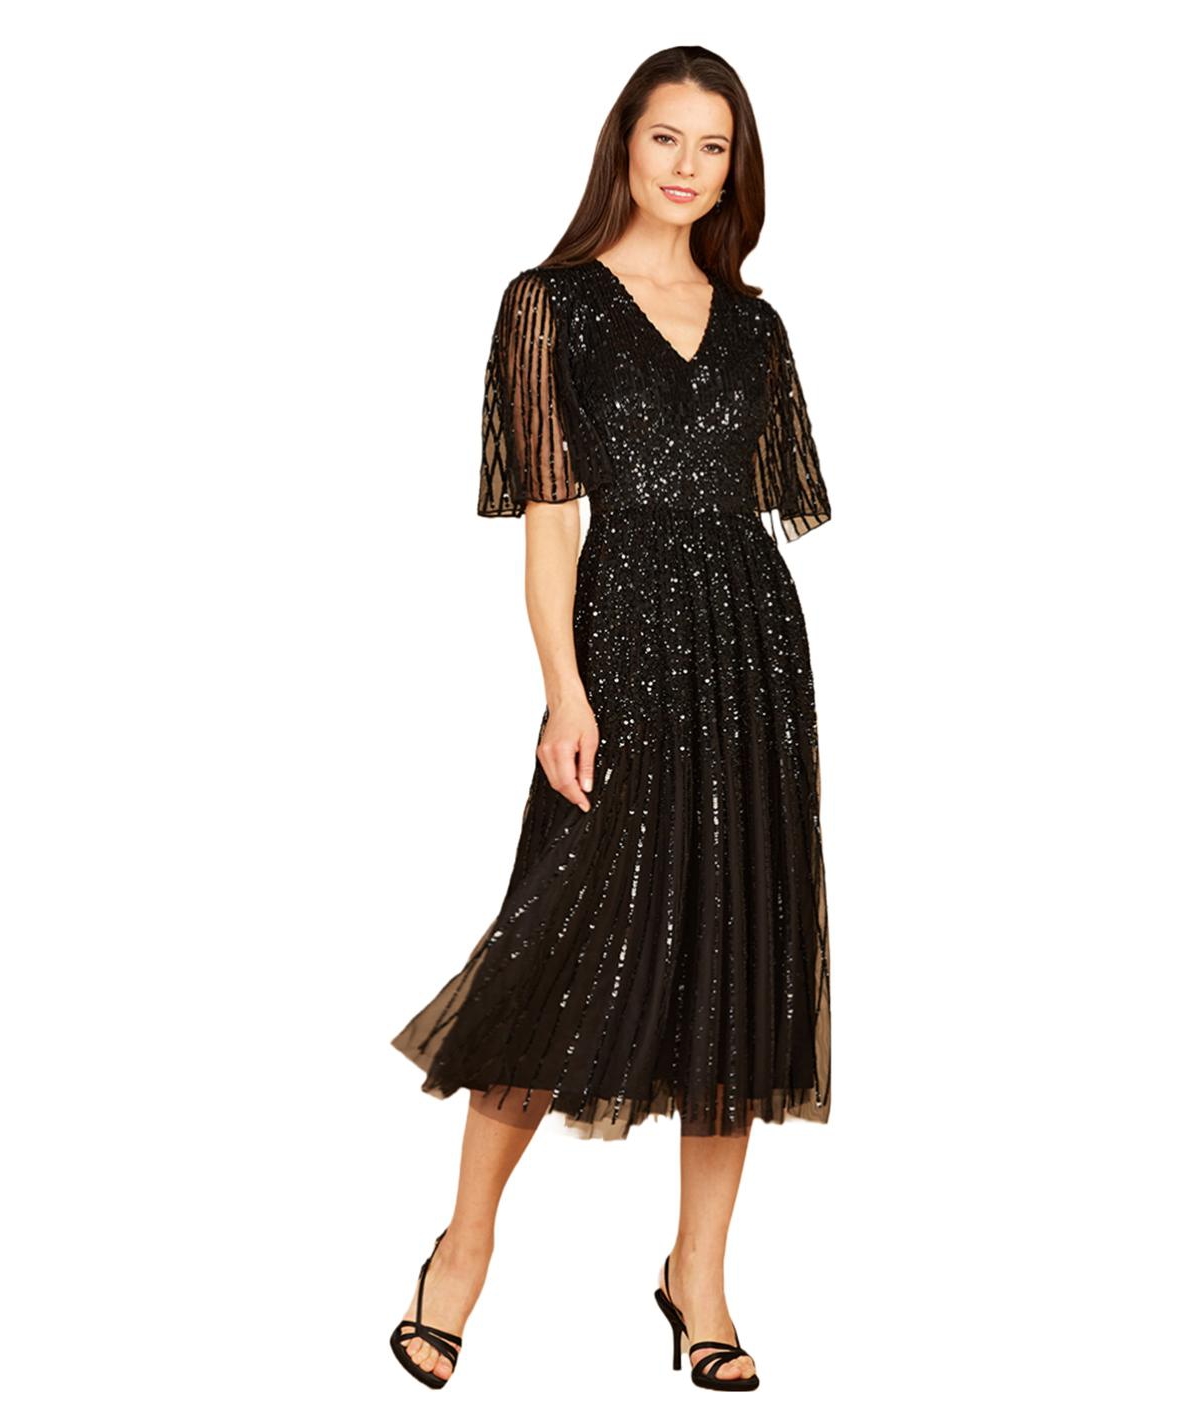 Great Gatsby Dress – Great Gatsby Dresses for Sale Womens Flowing Sequin Midi Dress with Short Sleeves - Black $458.00 AT vintagedancer.com